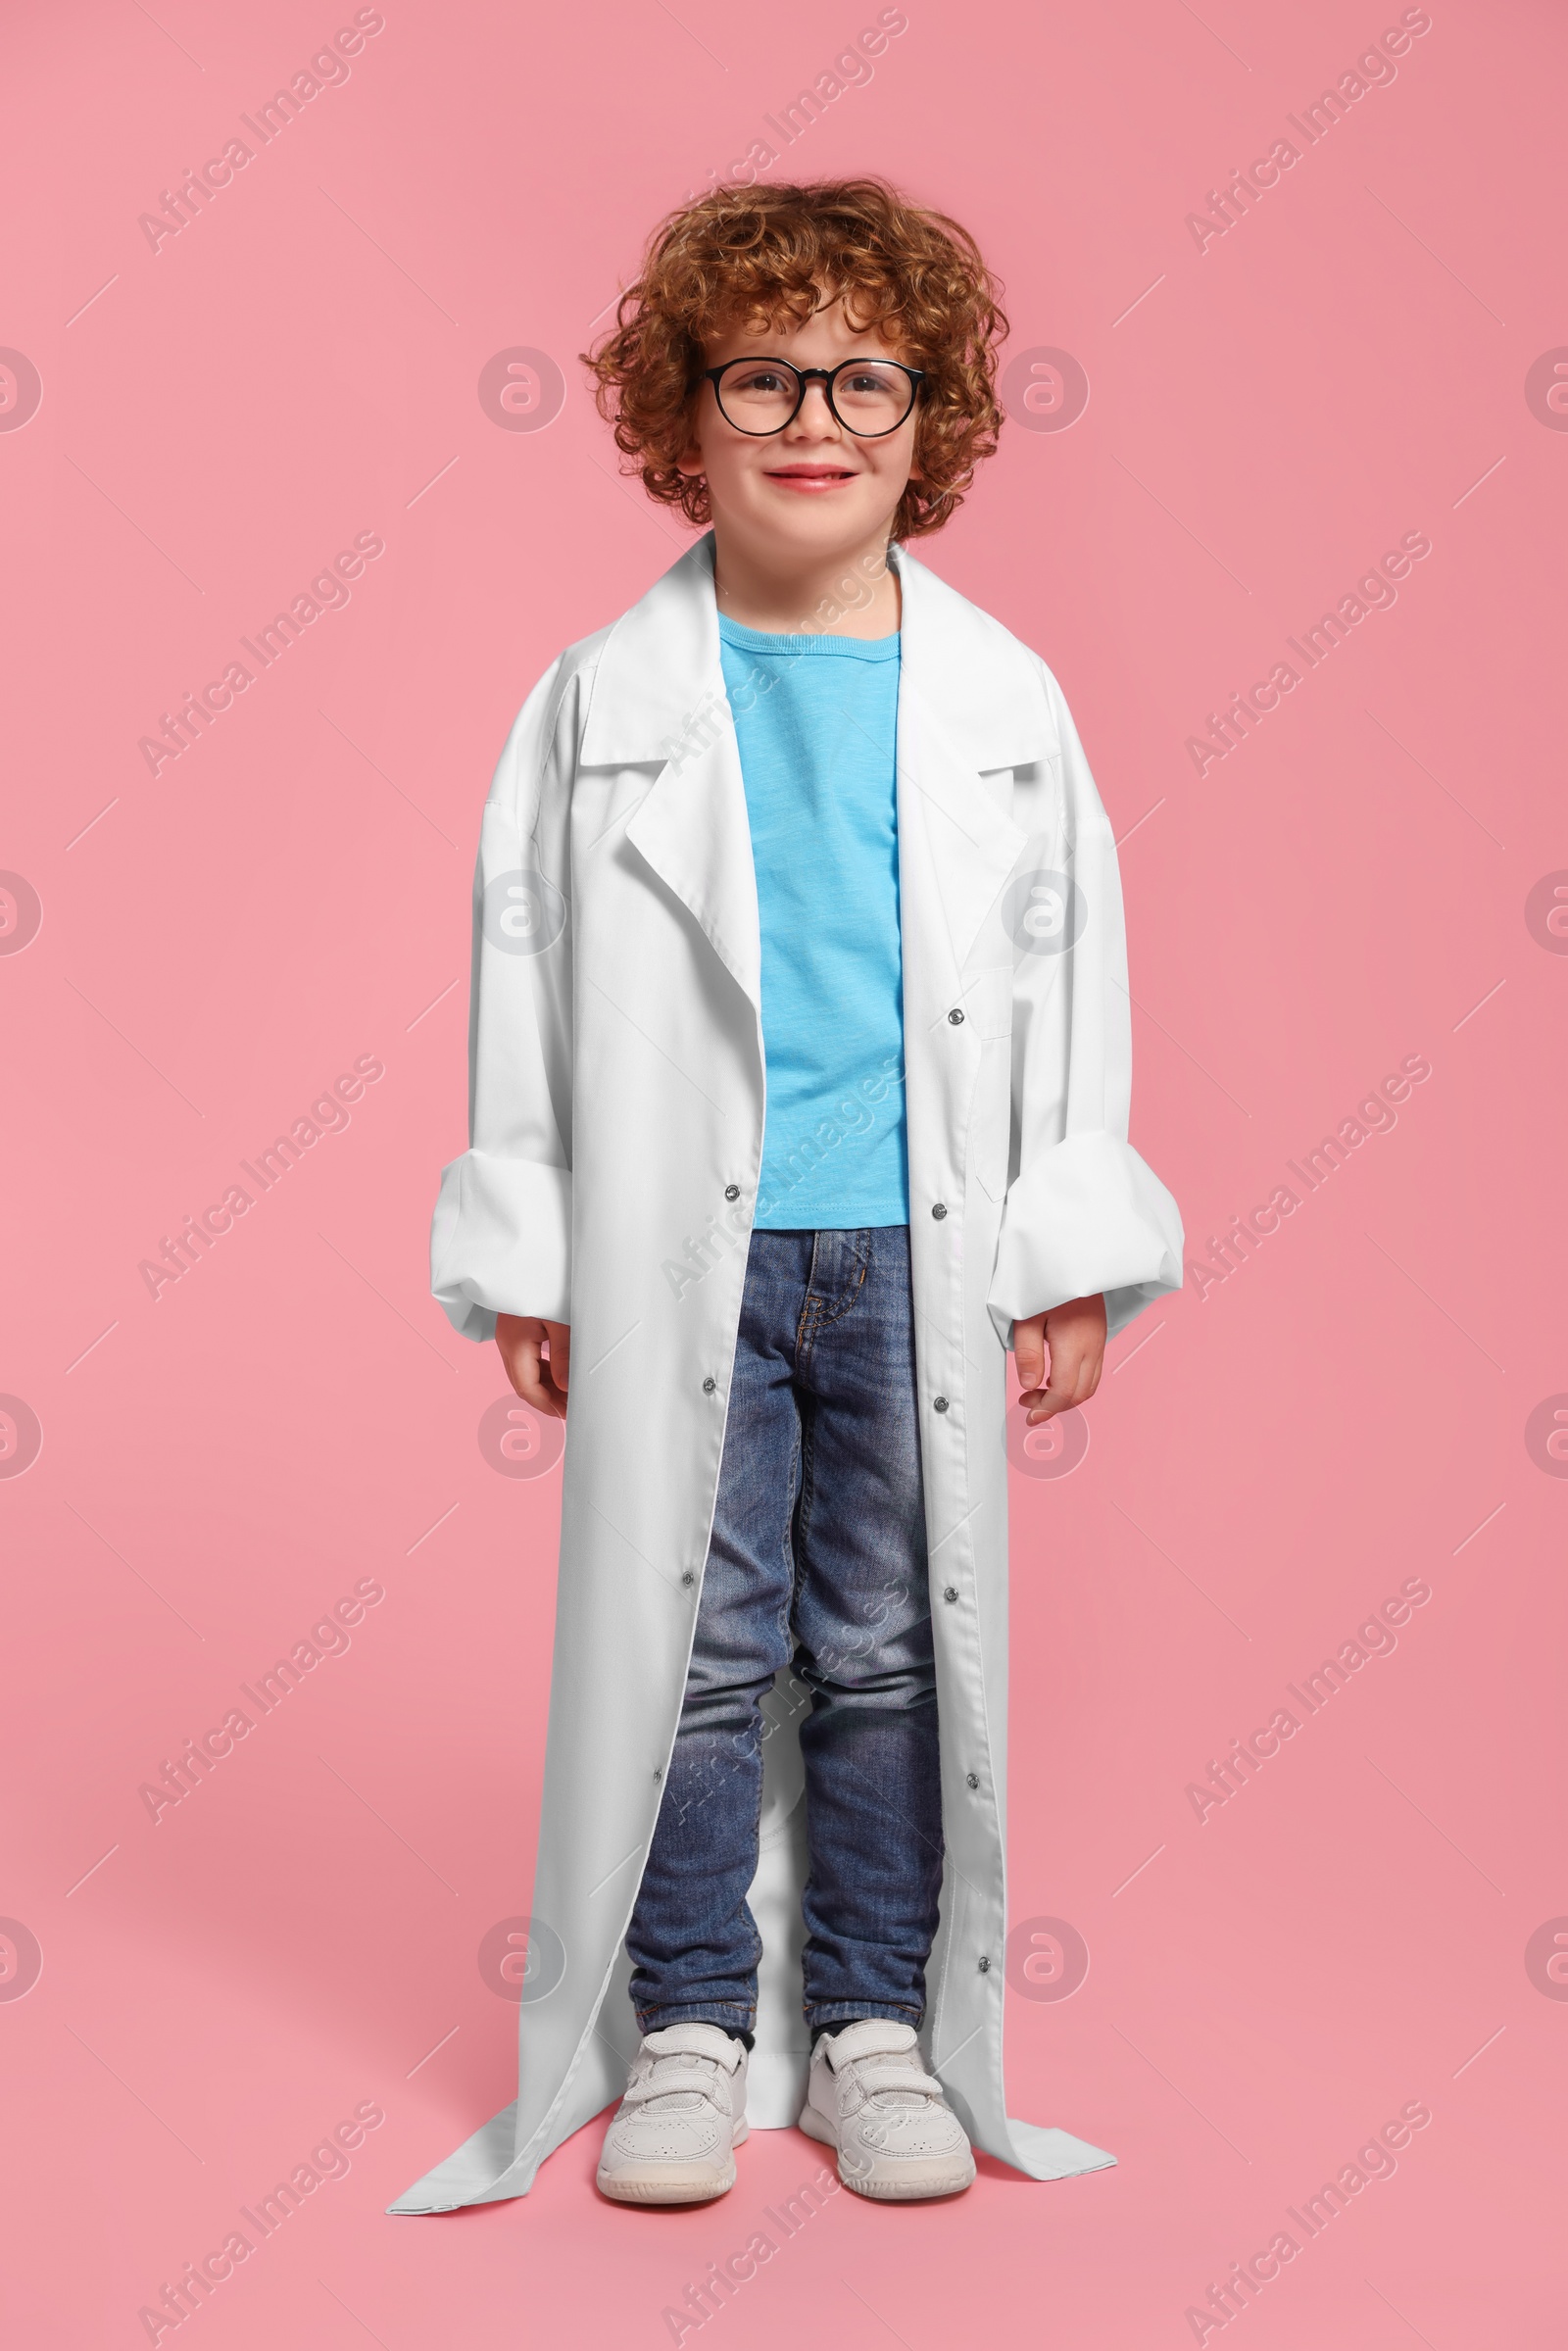 Photo of Full length portrait of little boy in medical uniform and glasses on pink background